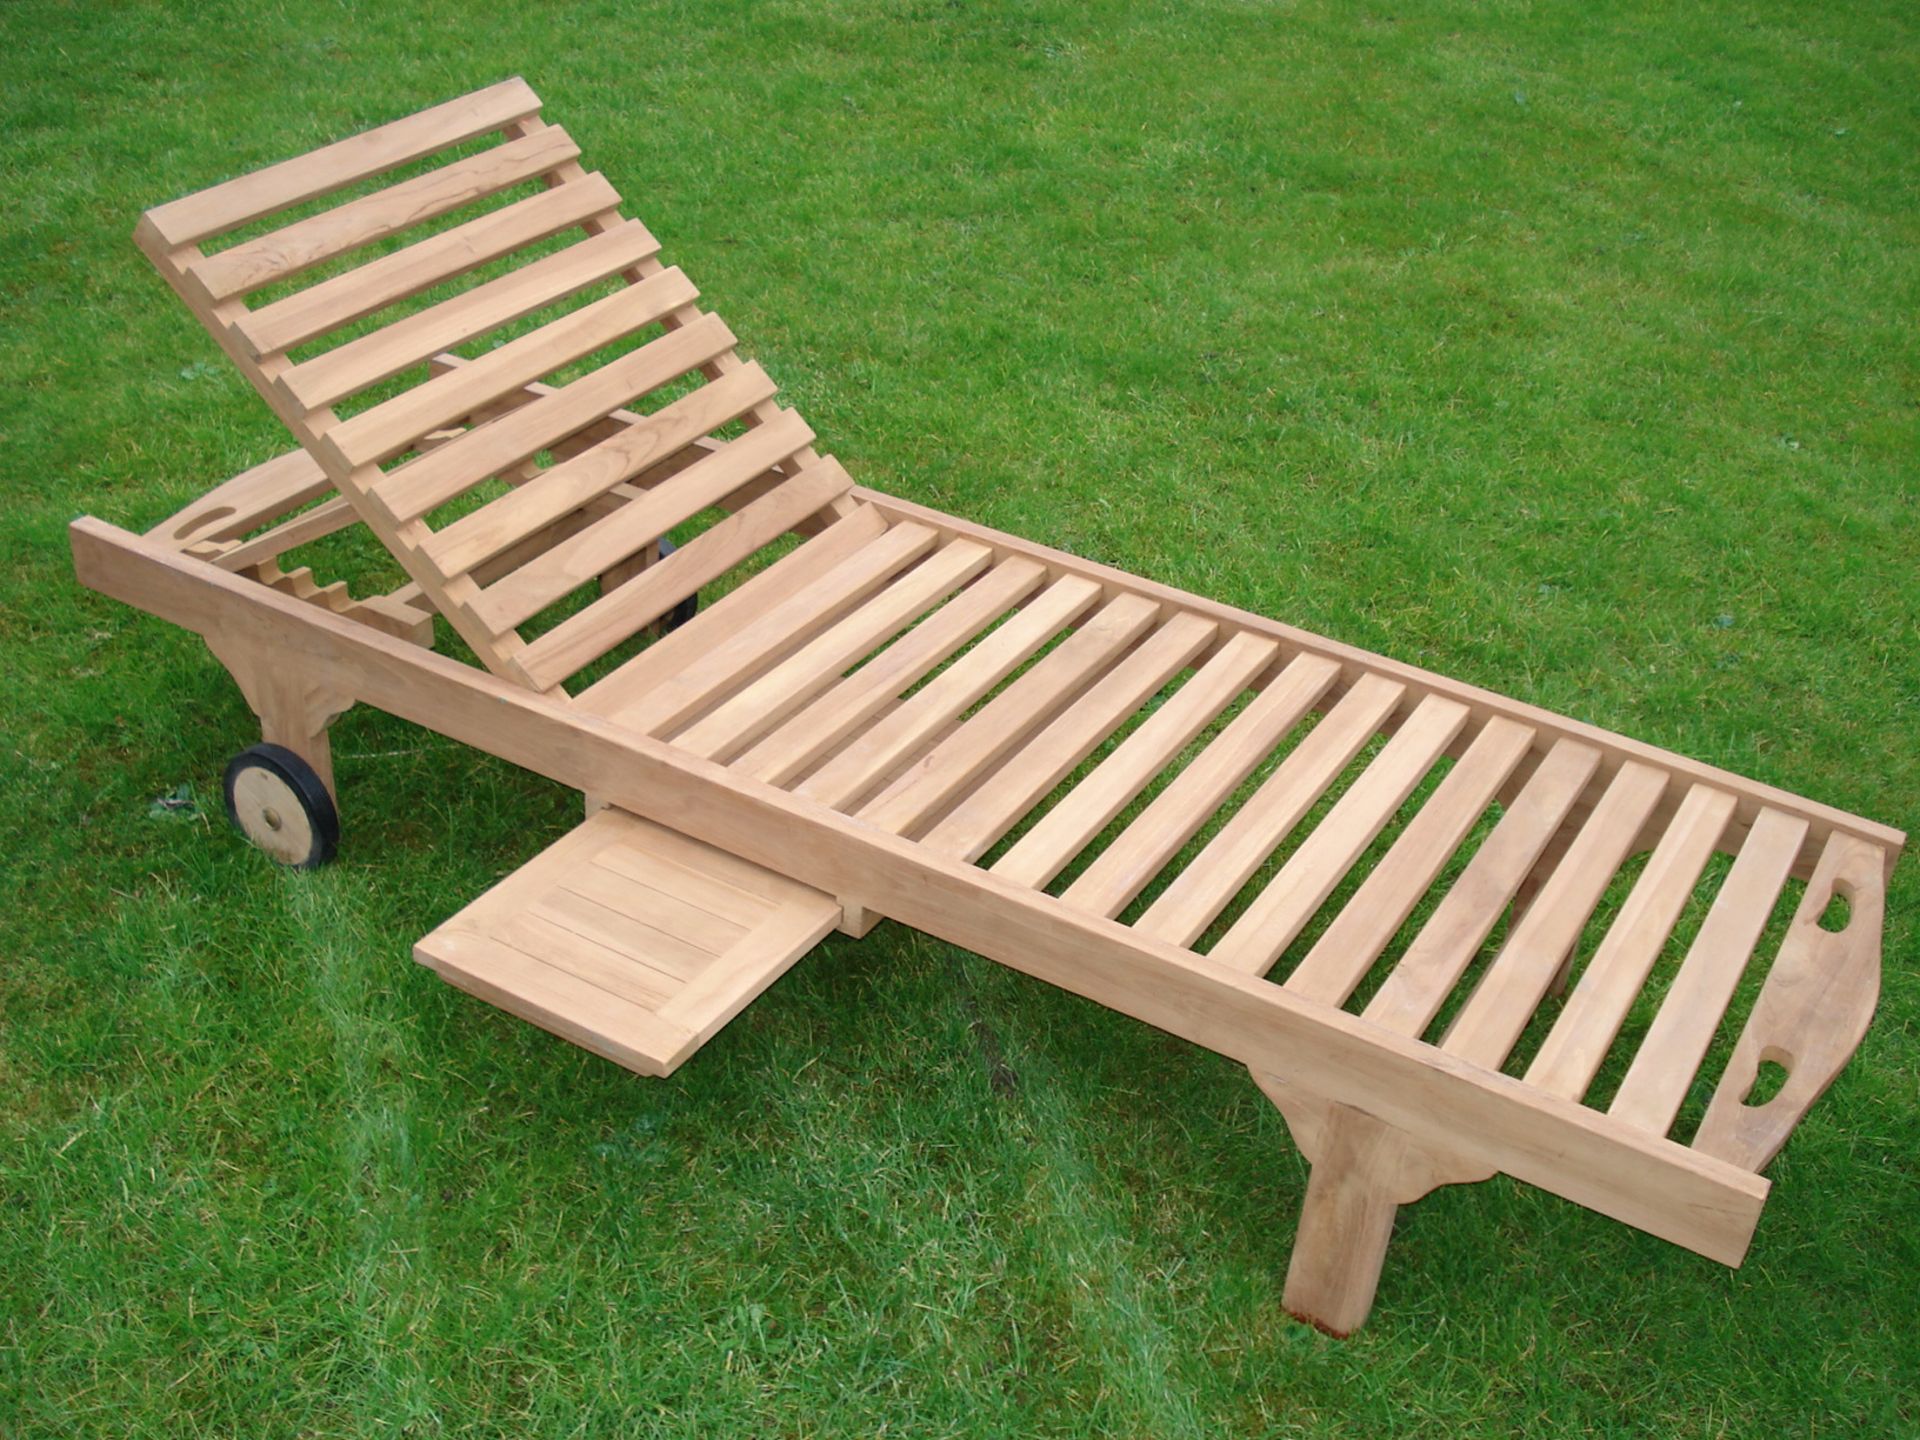 NEW BOXED SOLID TEAK RECLINING SUNLOUNGER ON WHEELS